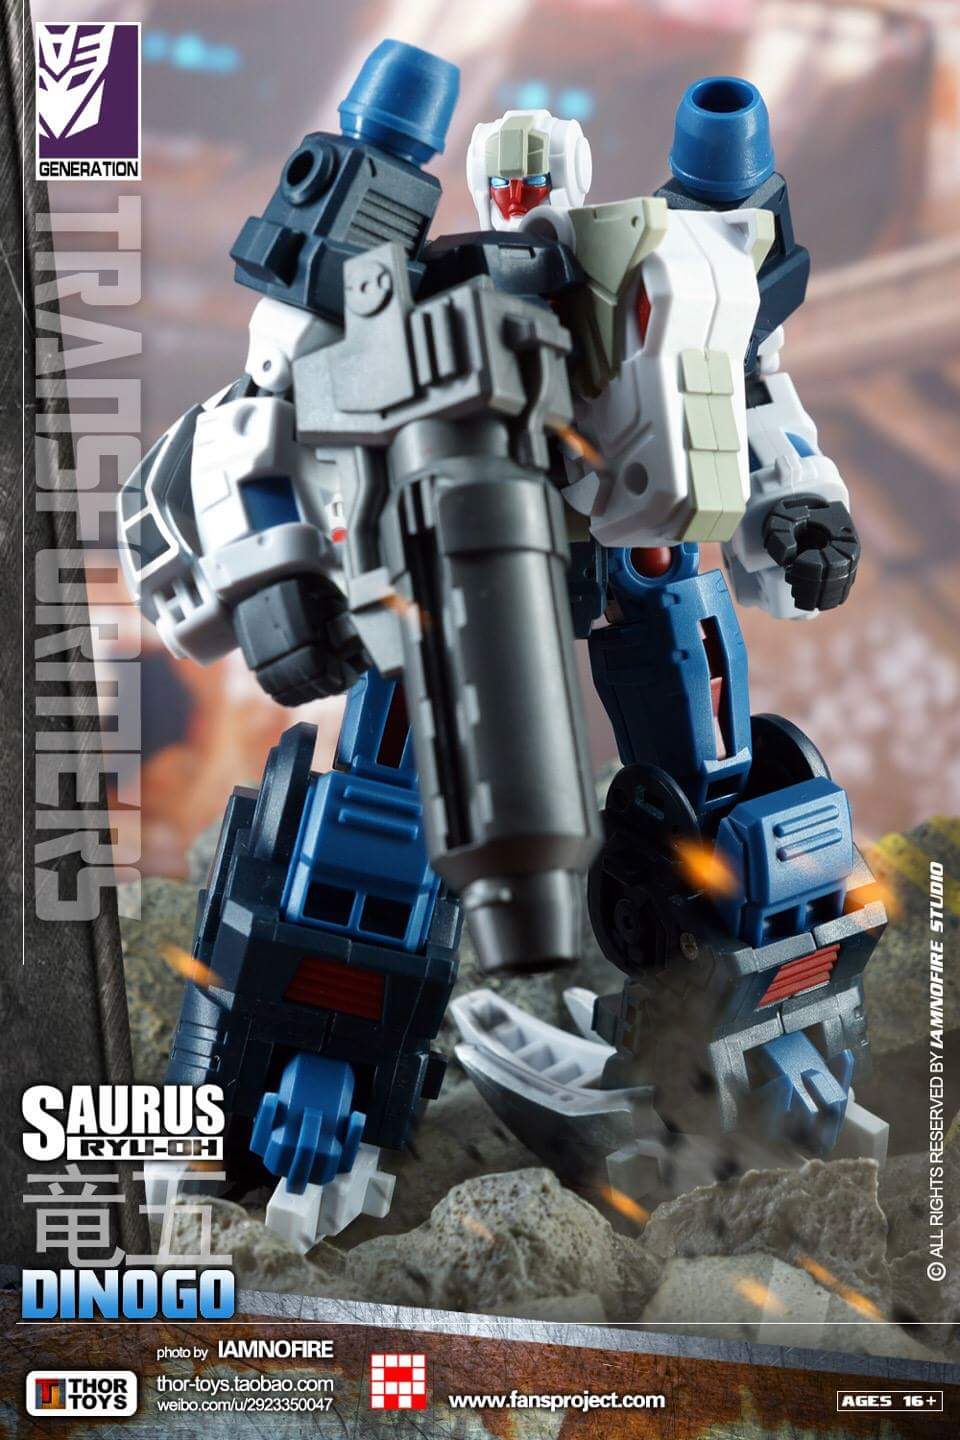 [FansProject] Produit Tiers - Ryu-Oh aka Dinoking (Victory) | Beastructor aka Monstructor (USA) - Page 2 WzZBieIt